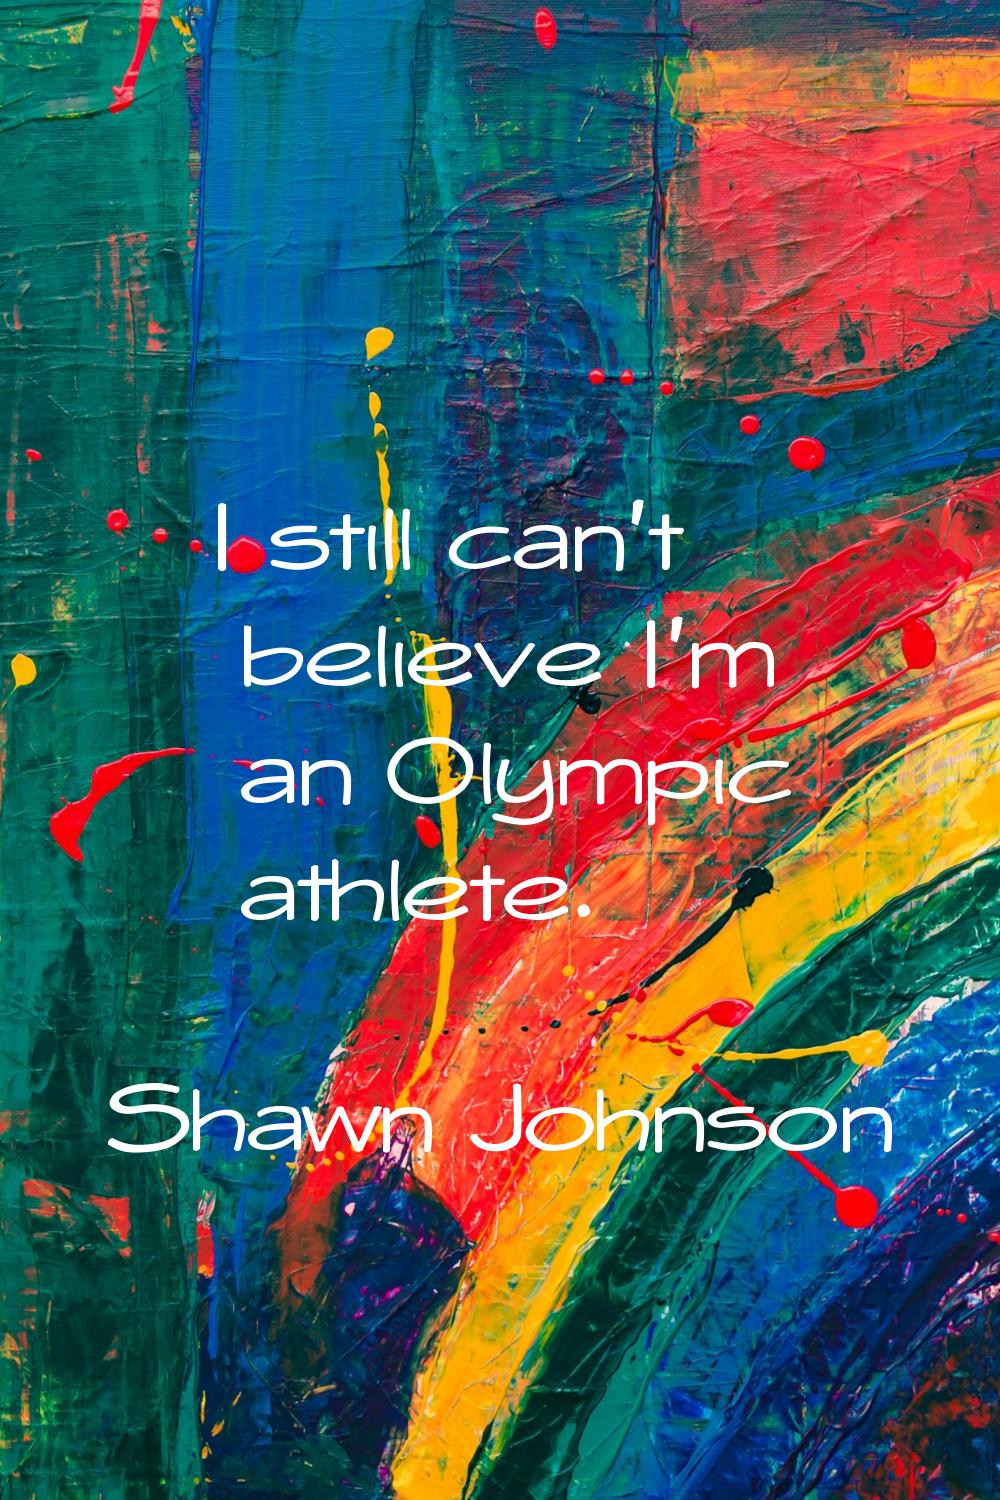 I still can't believe I'm an Olympic athlete.